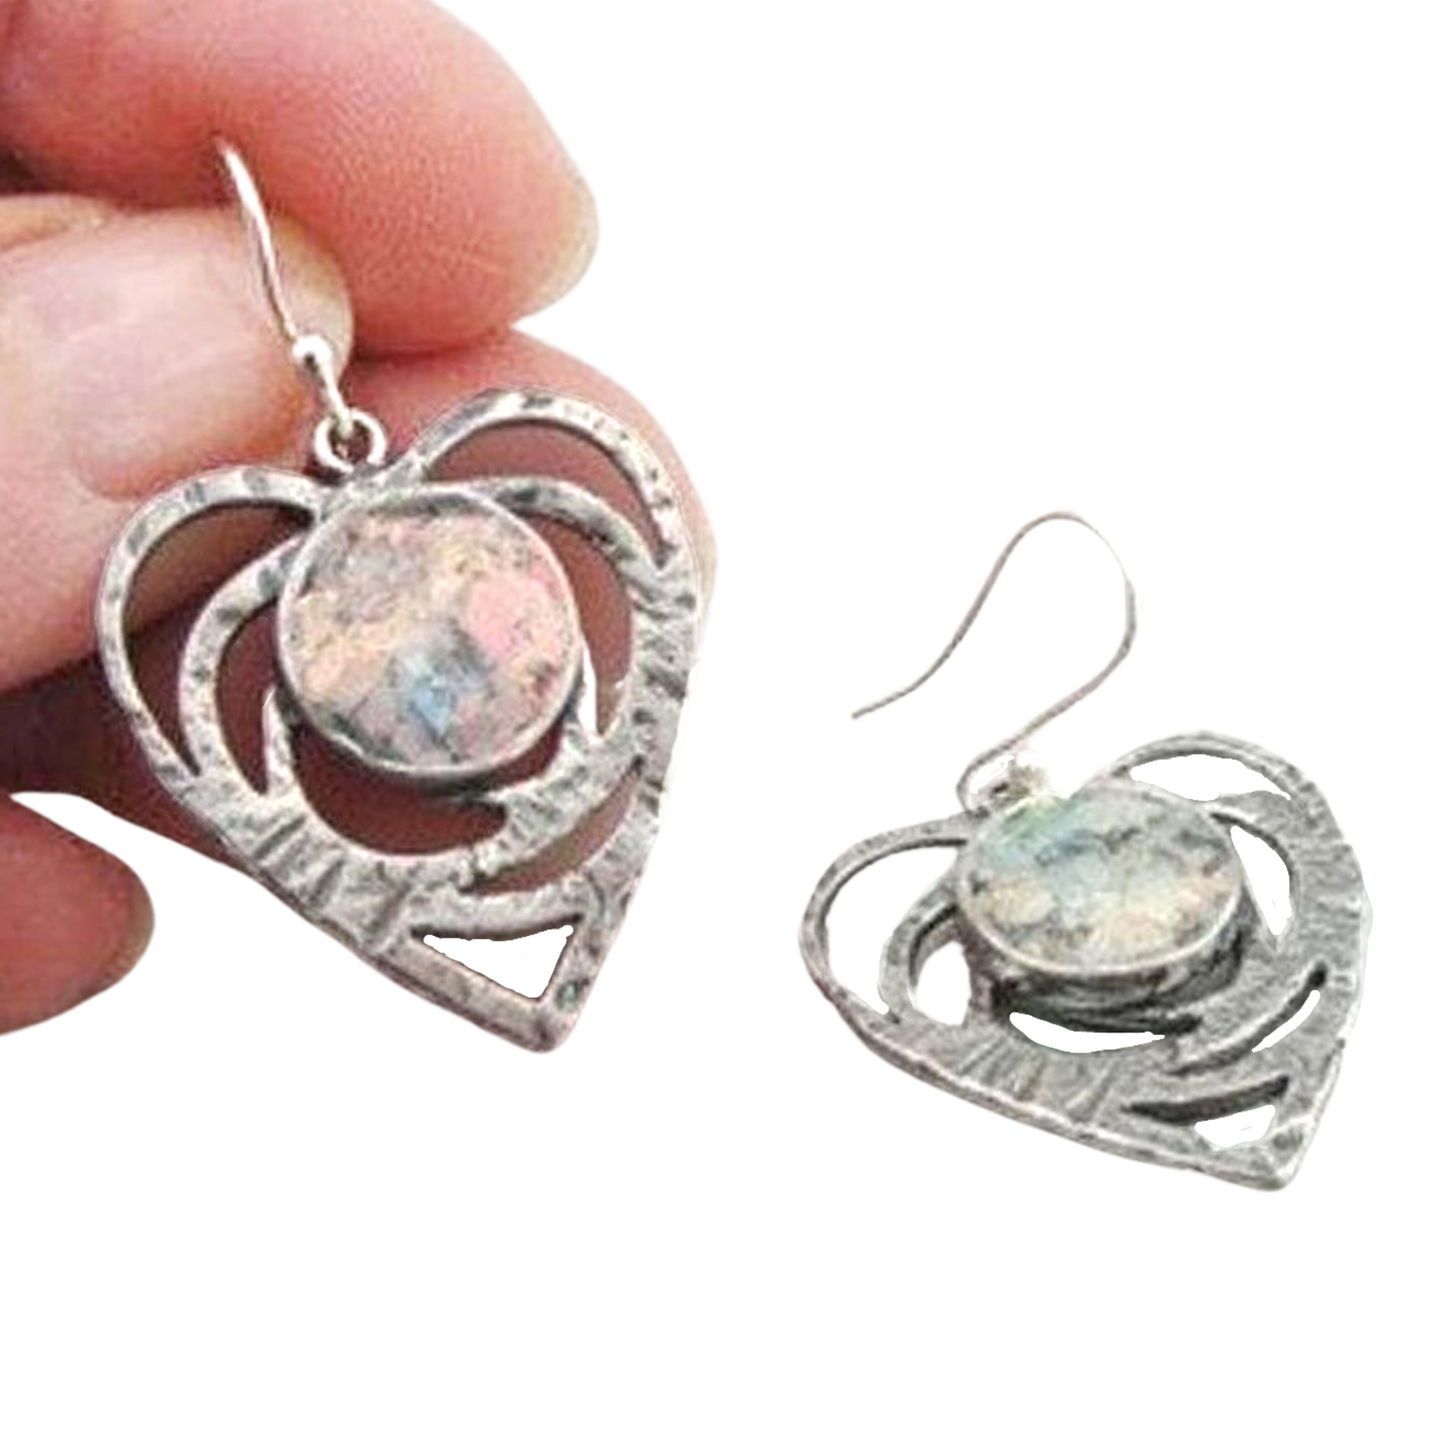 Sterling silver Dangle Heart Earrings, with Genuine Roman Glass, Handmade Jewelry, Roman Glass Earrings, Heart shape dangles, Israeli jewelry, from Israel, Israeli design, Holly land jewelry, Christmas gift, Valentin gift, gift for her, LOVE, Heart